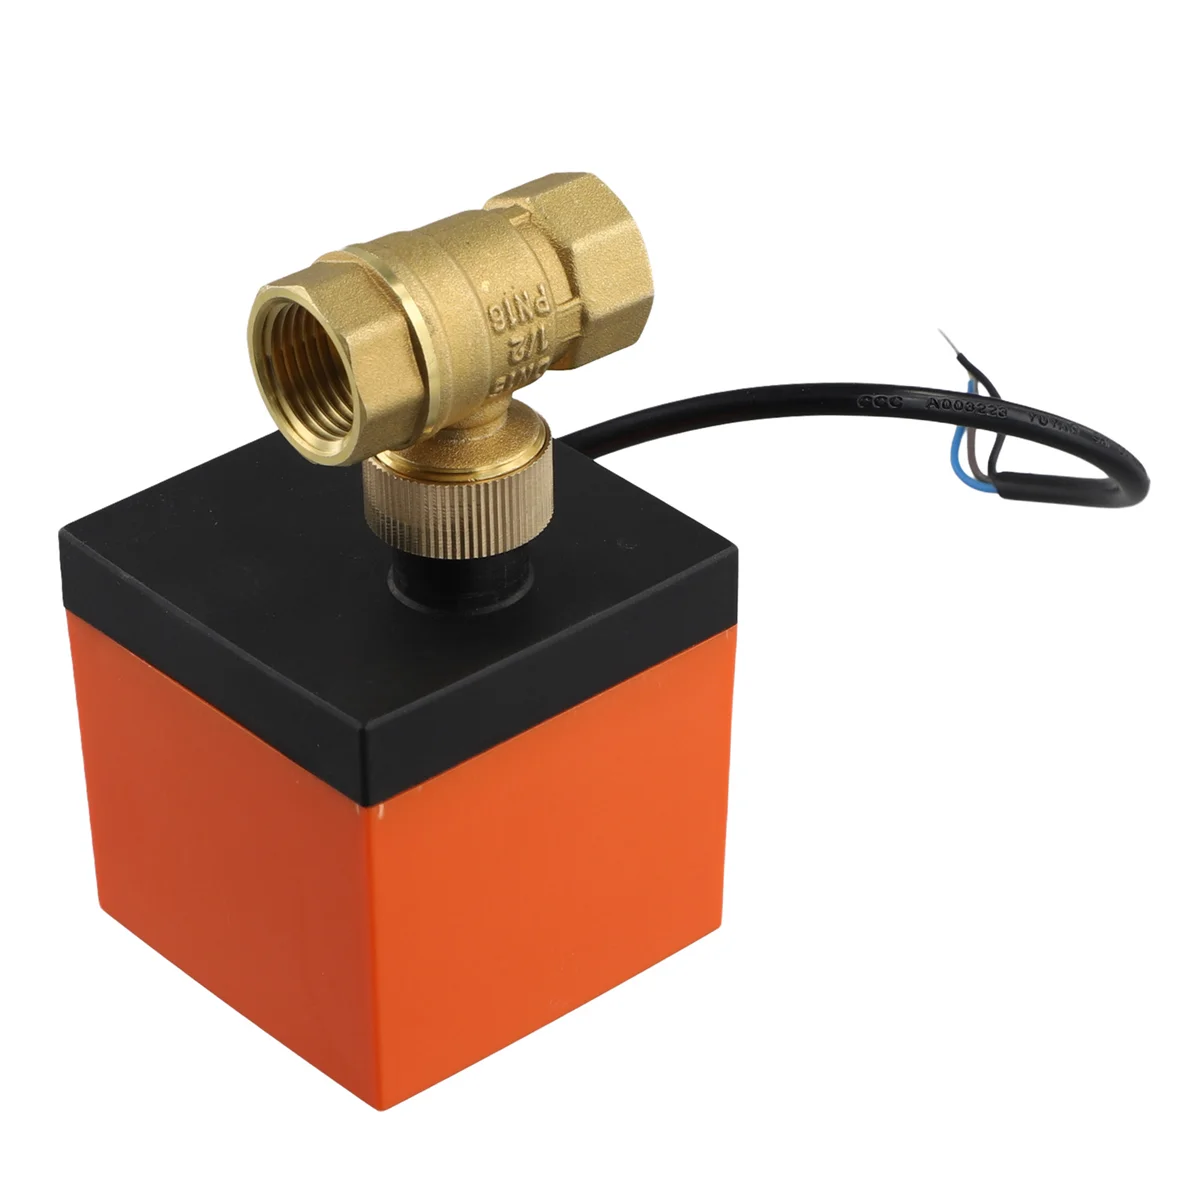 

AC 220V Brass Electric Thread Ball Valve 2-Way 3-Wire Solenoid Water Valve with Actuator DN15